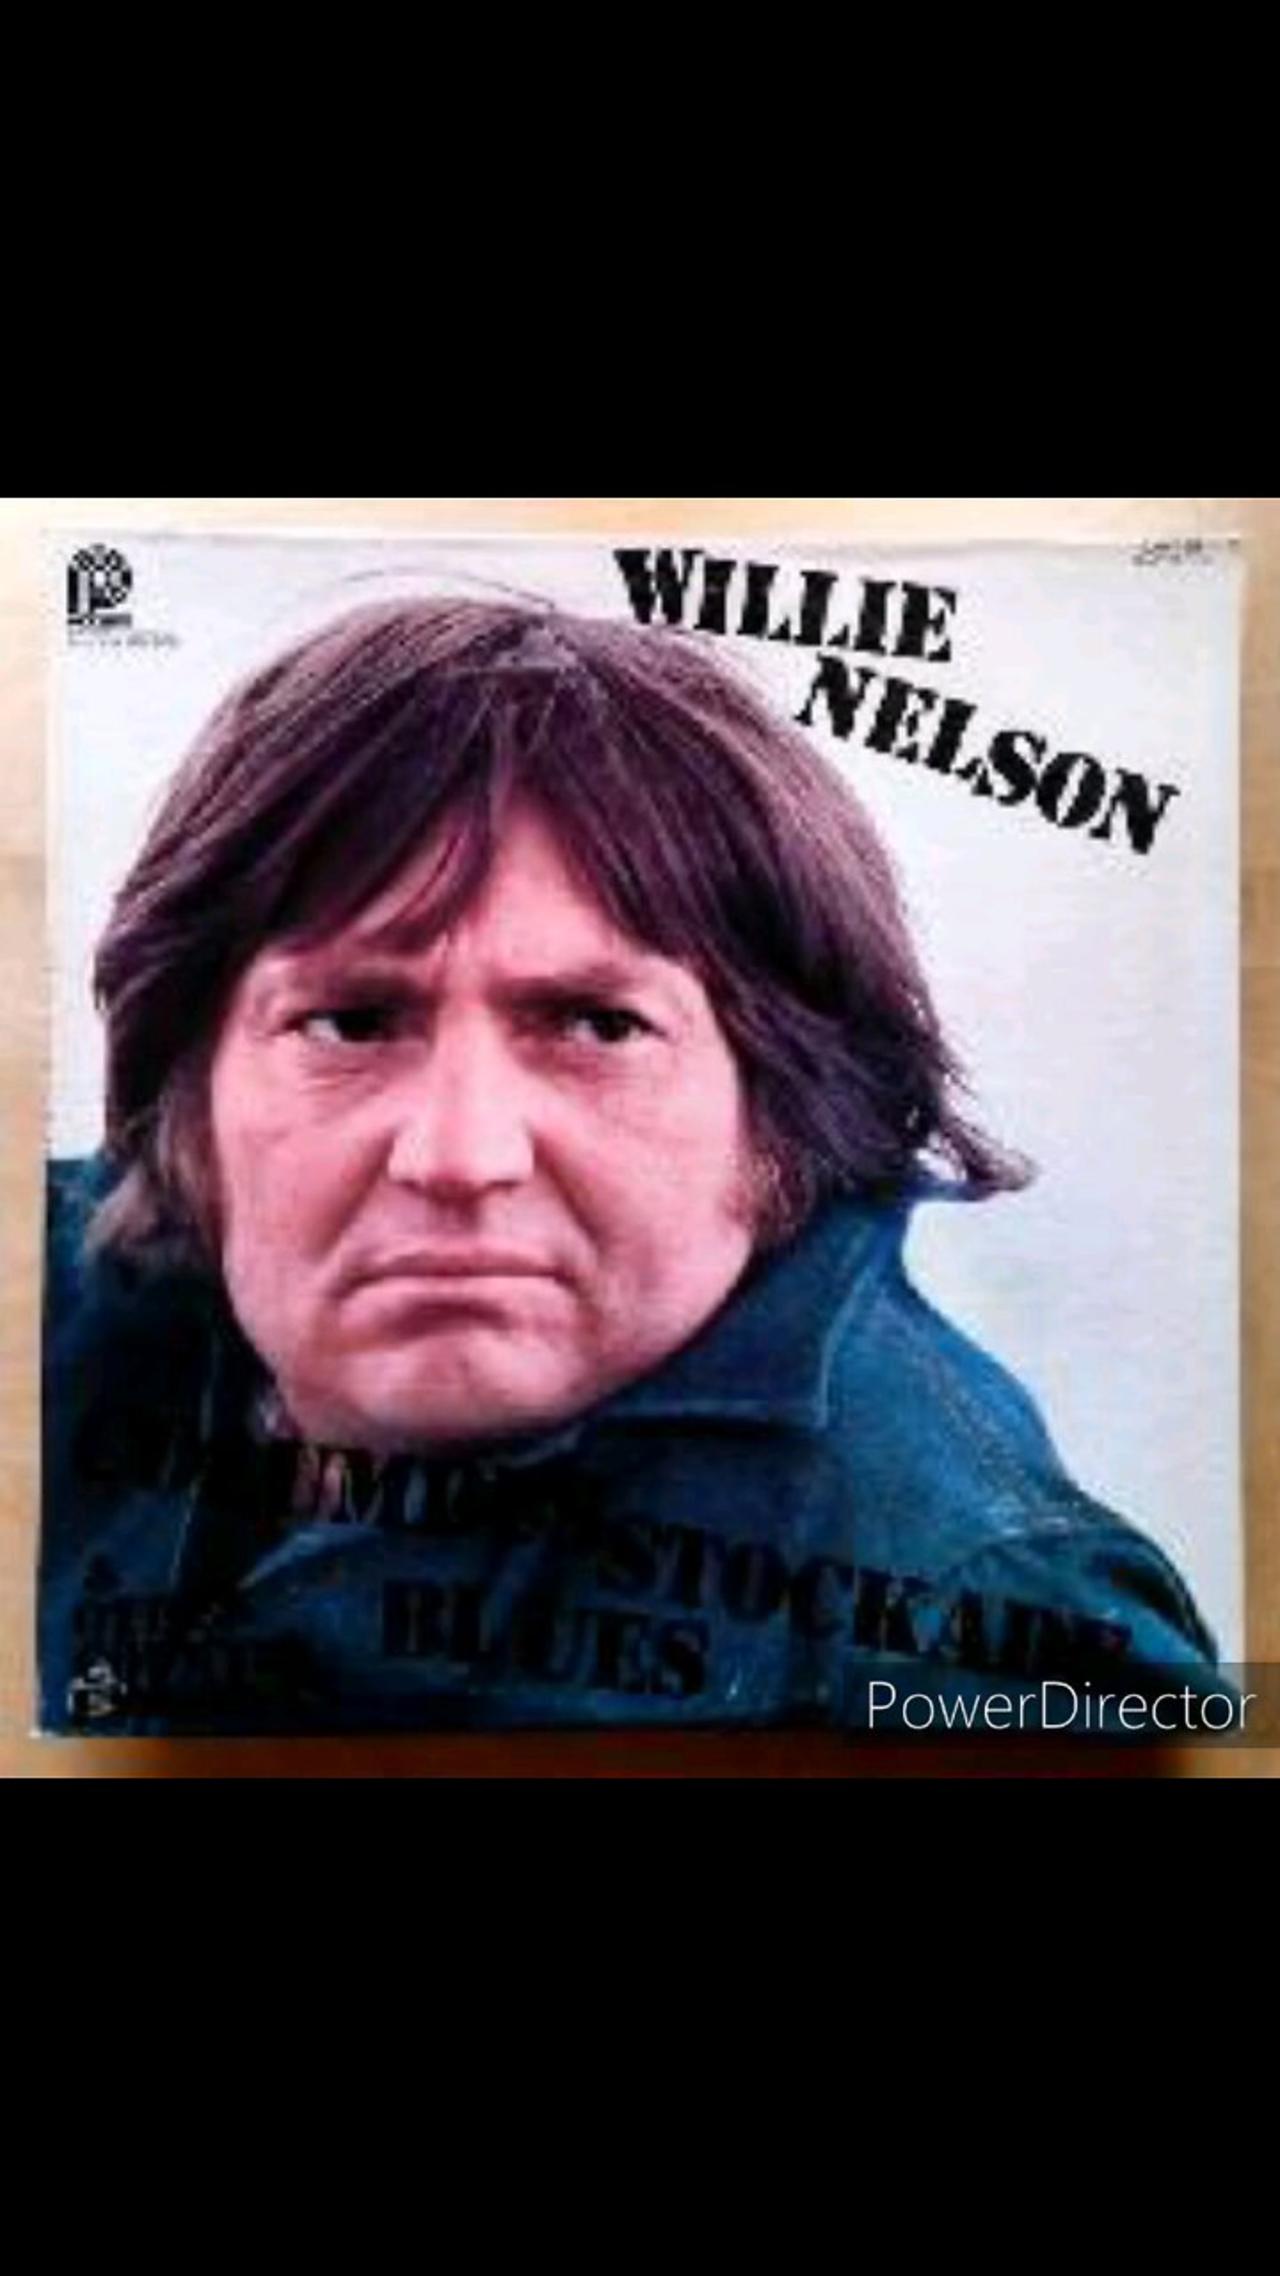 Willie Nelson - She's Not For You